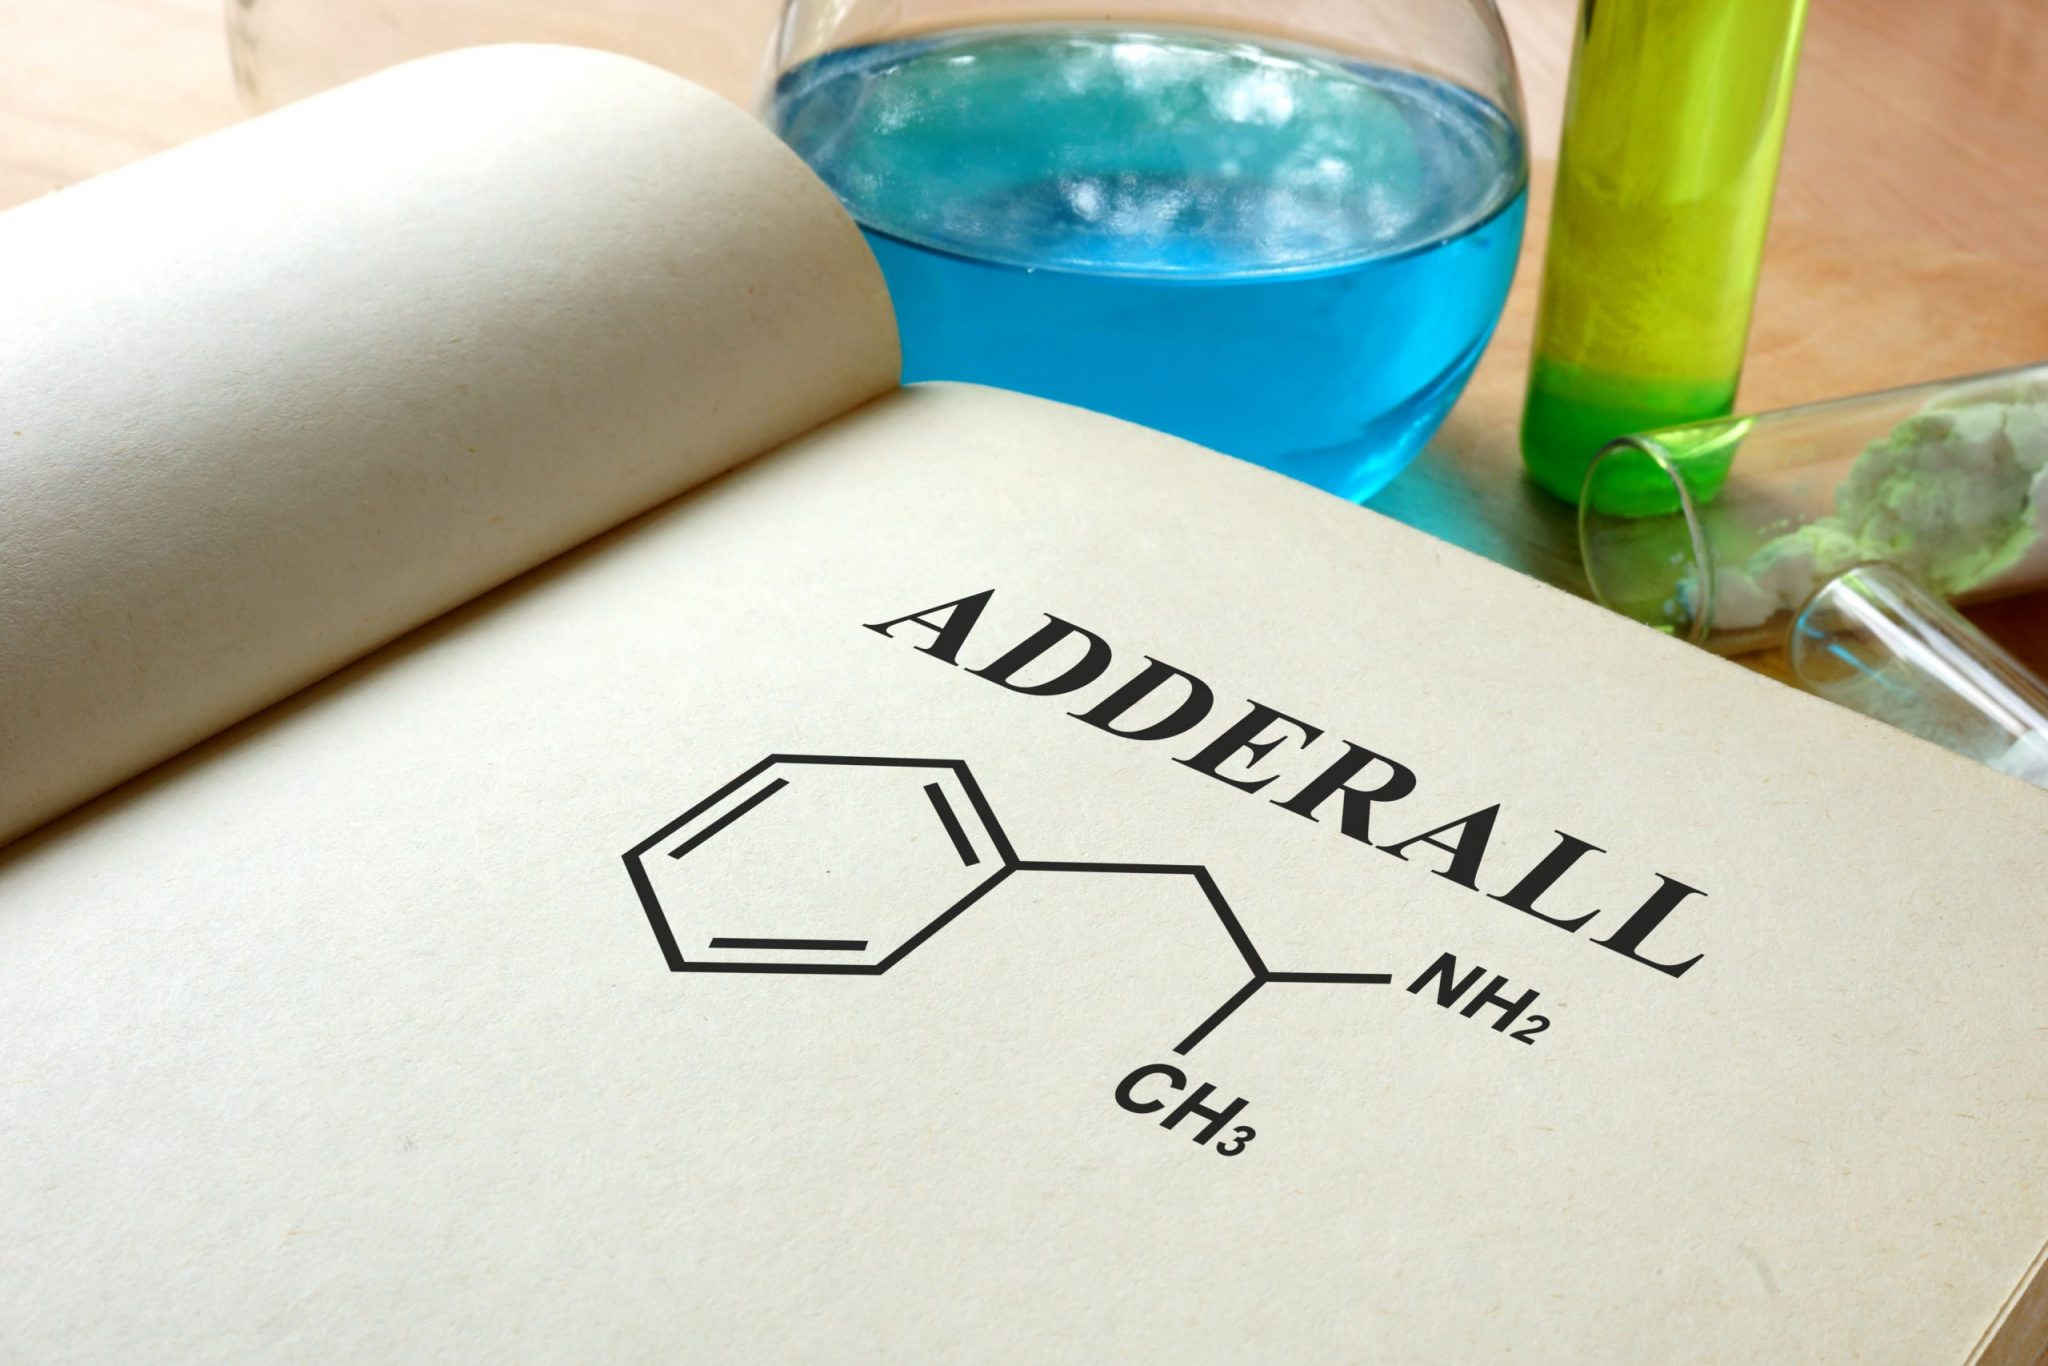 Book open to the word "ADDERALL" written over an illustration of the chemical makeup of the drug. Test tubes and a flask are partially visible in the background.